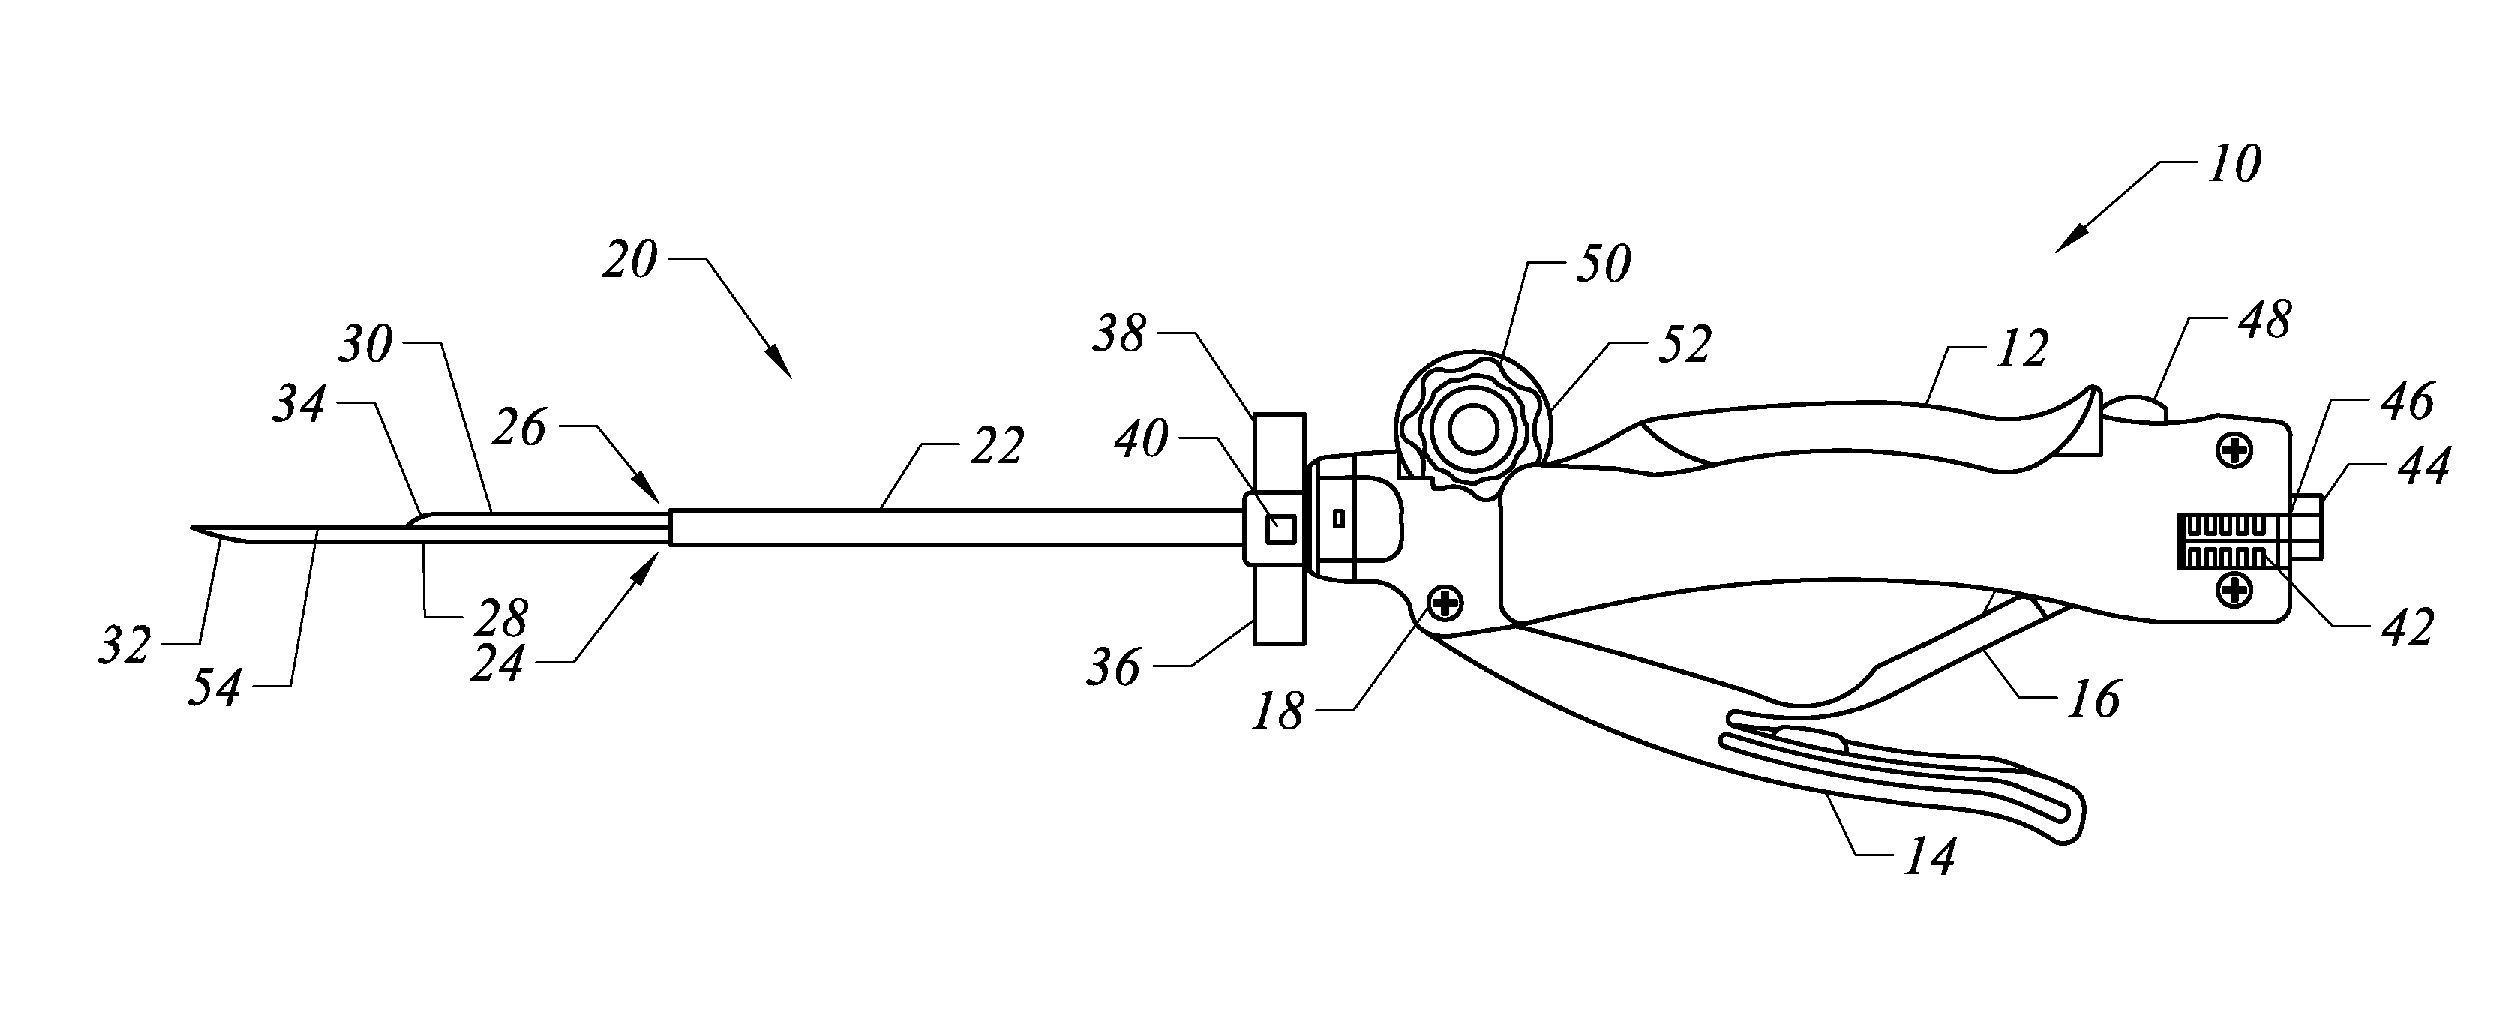 Implant and delivery system for soft tissue repair